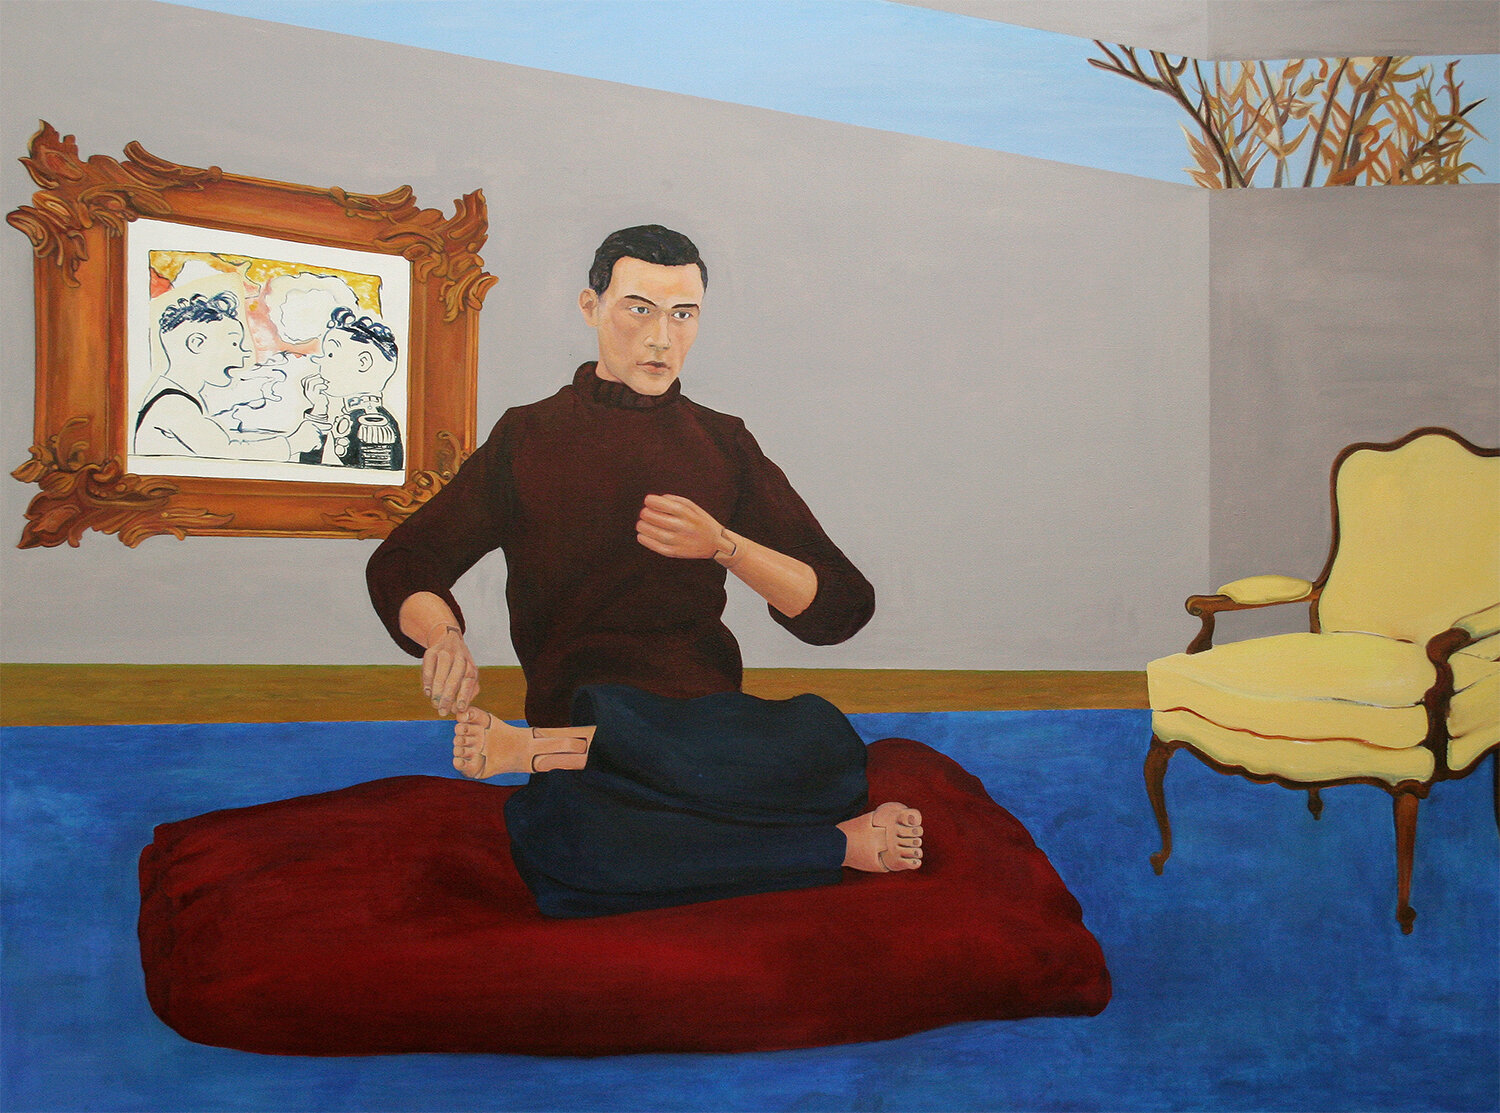 Irina Alimanestianu's "Guy in Lotus Position" (2004, oil on canvas, 63" x 84") on view in the Hamptons